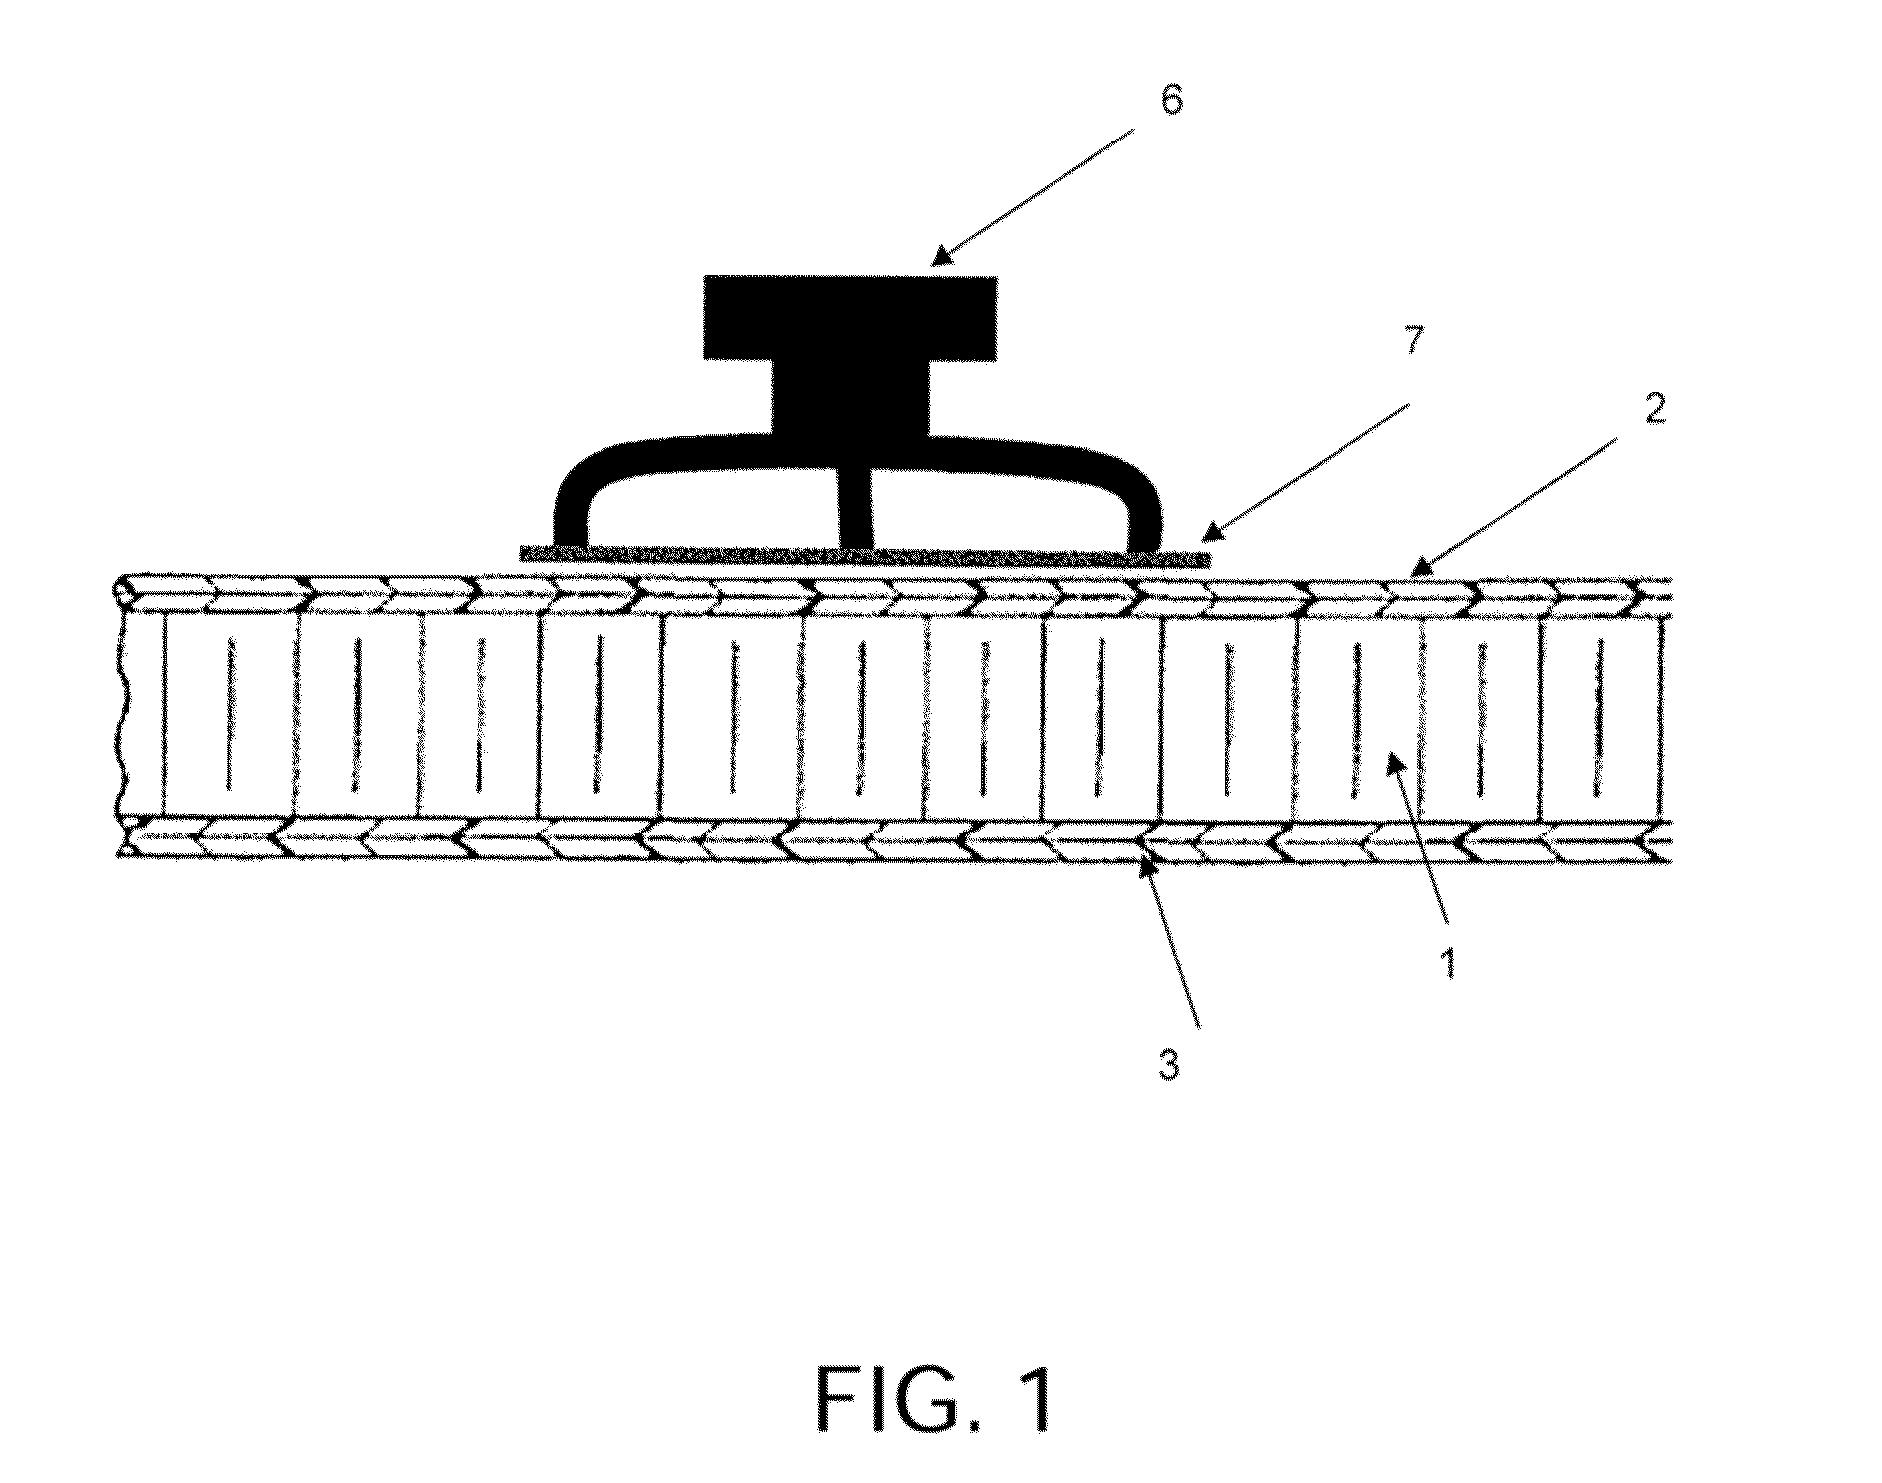 Method and apparatus for forming and adhering panel and bracket structures